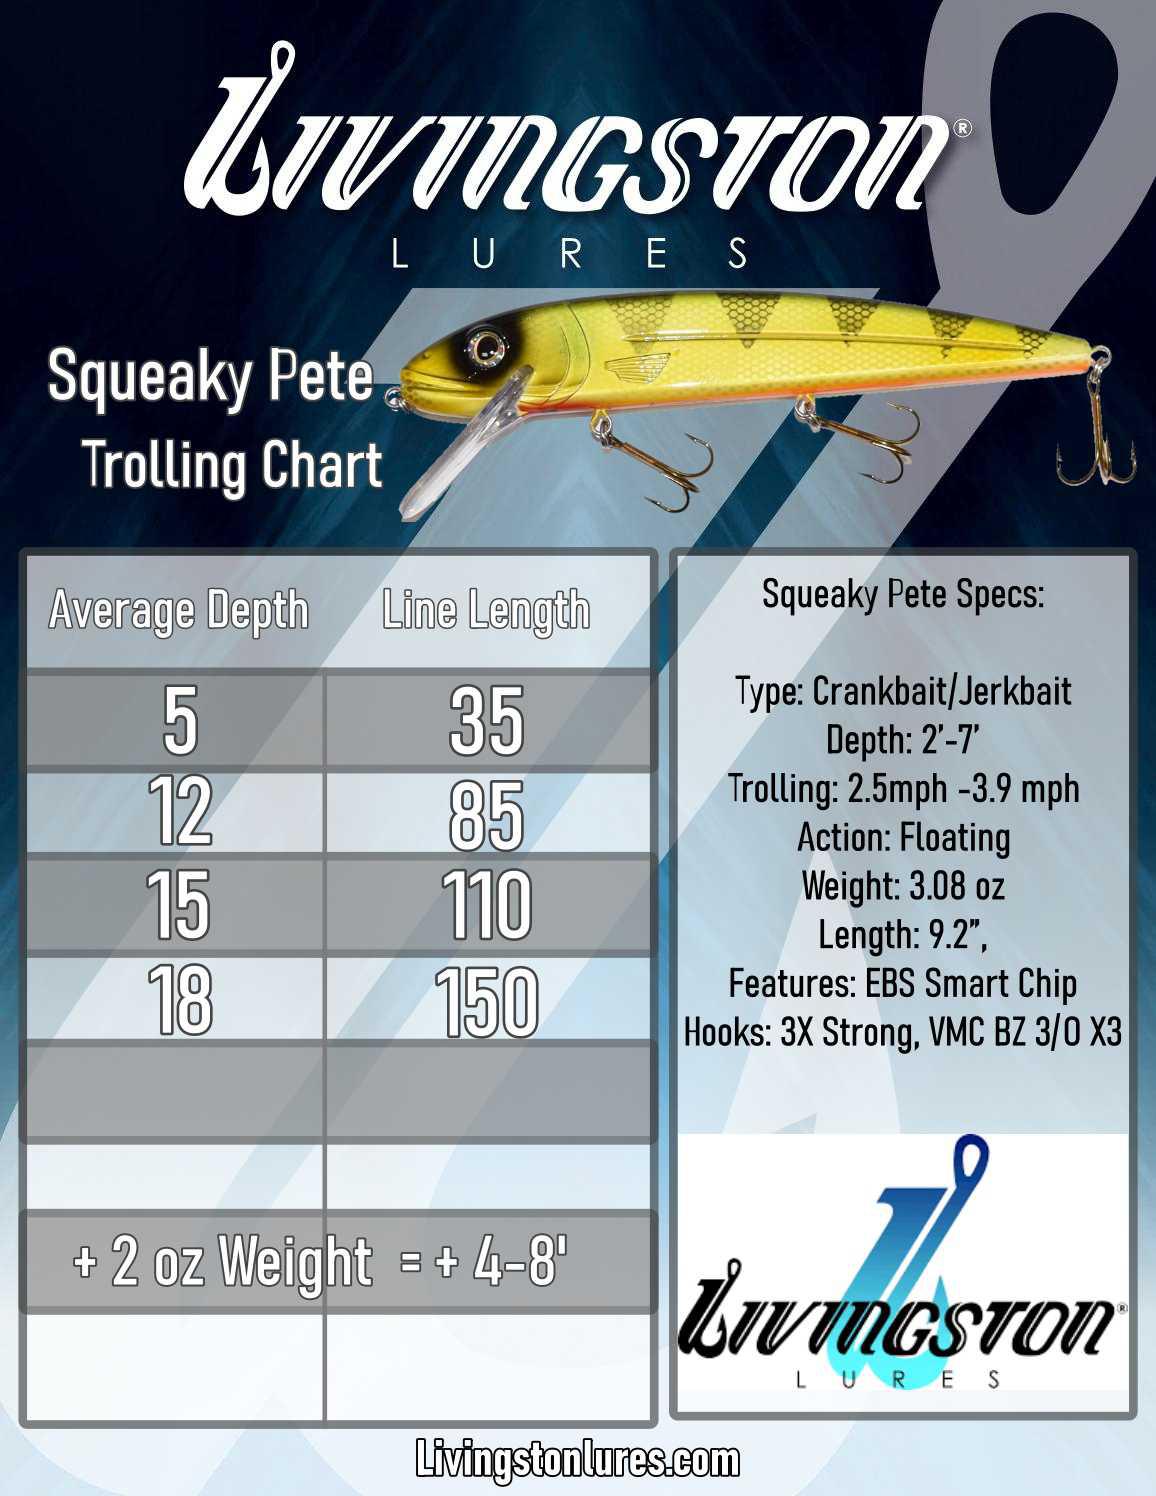 Livingston Lures Squeaky Pete Trolling Chart 